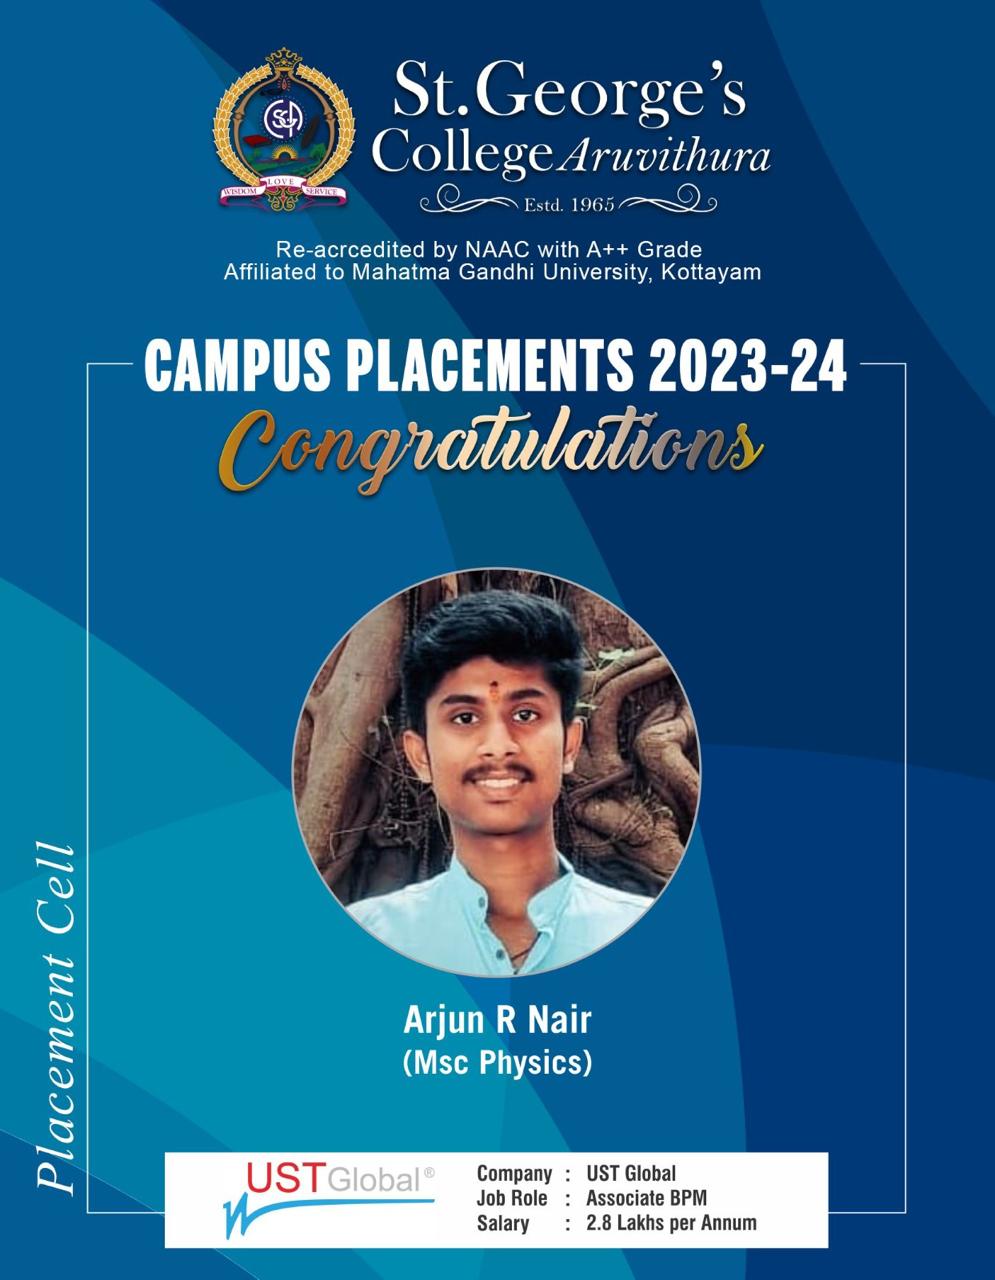 Campus Placements 2023-24: TCS